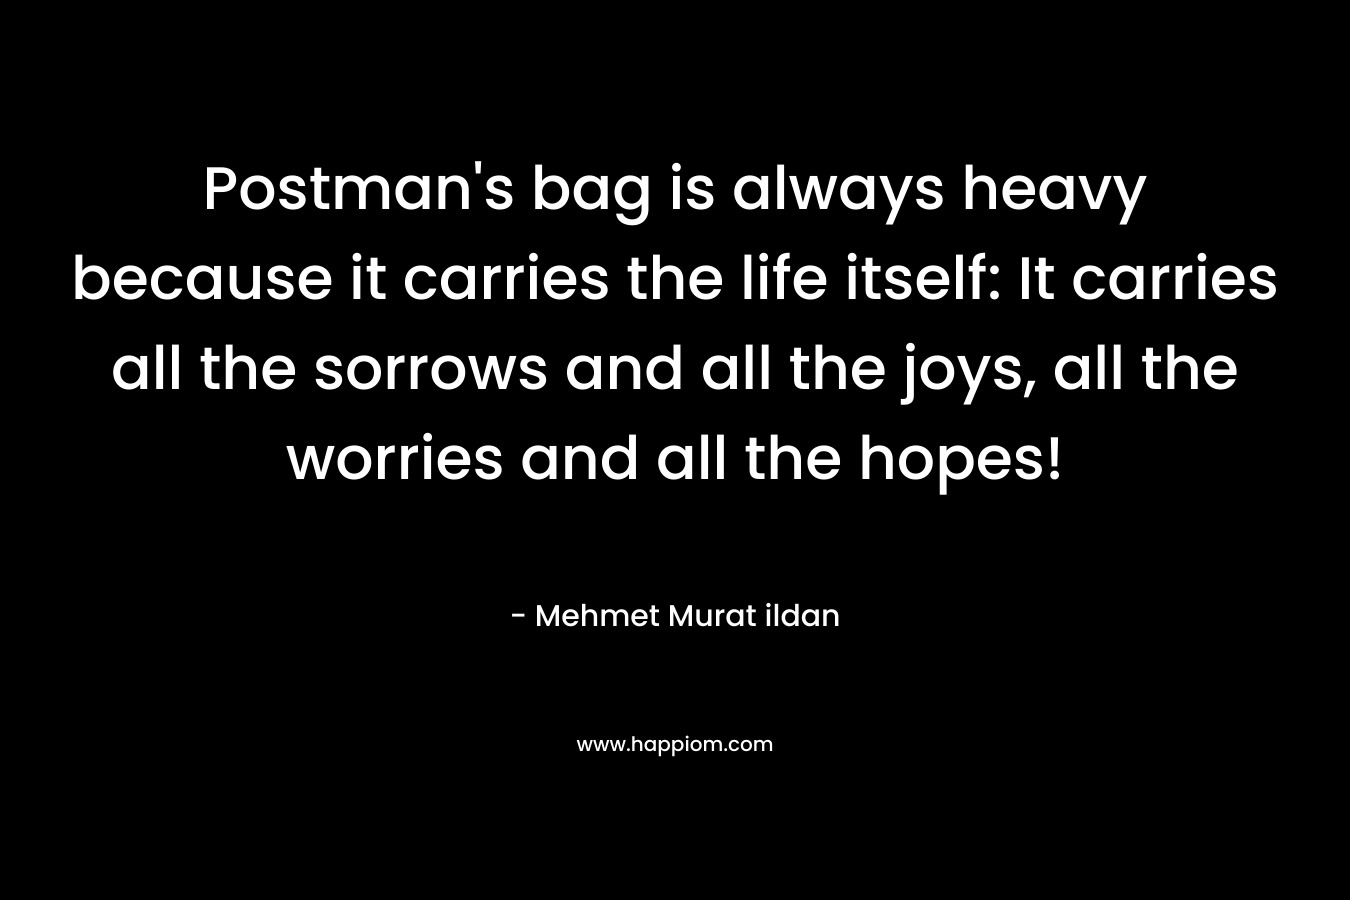 Postman's bag is always heavy because it carries the life itself: It carries all the sorrows and all the joys, all the worries and all the hopes!